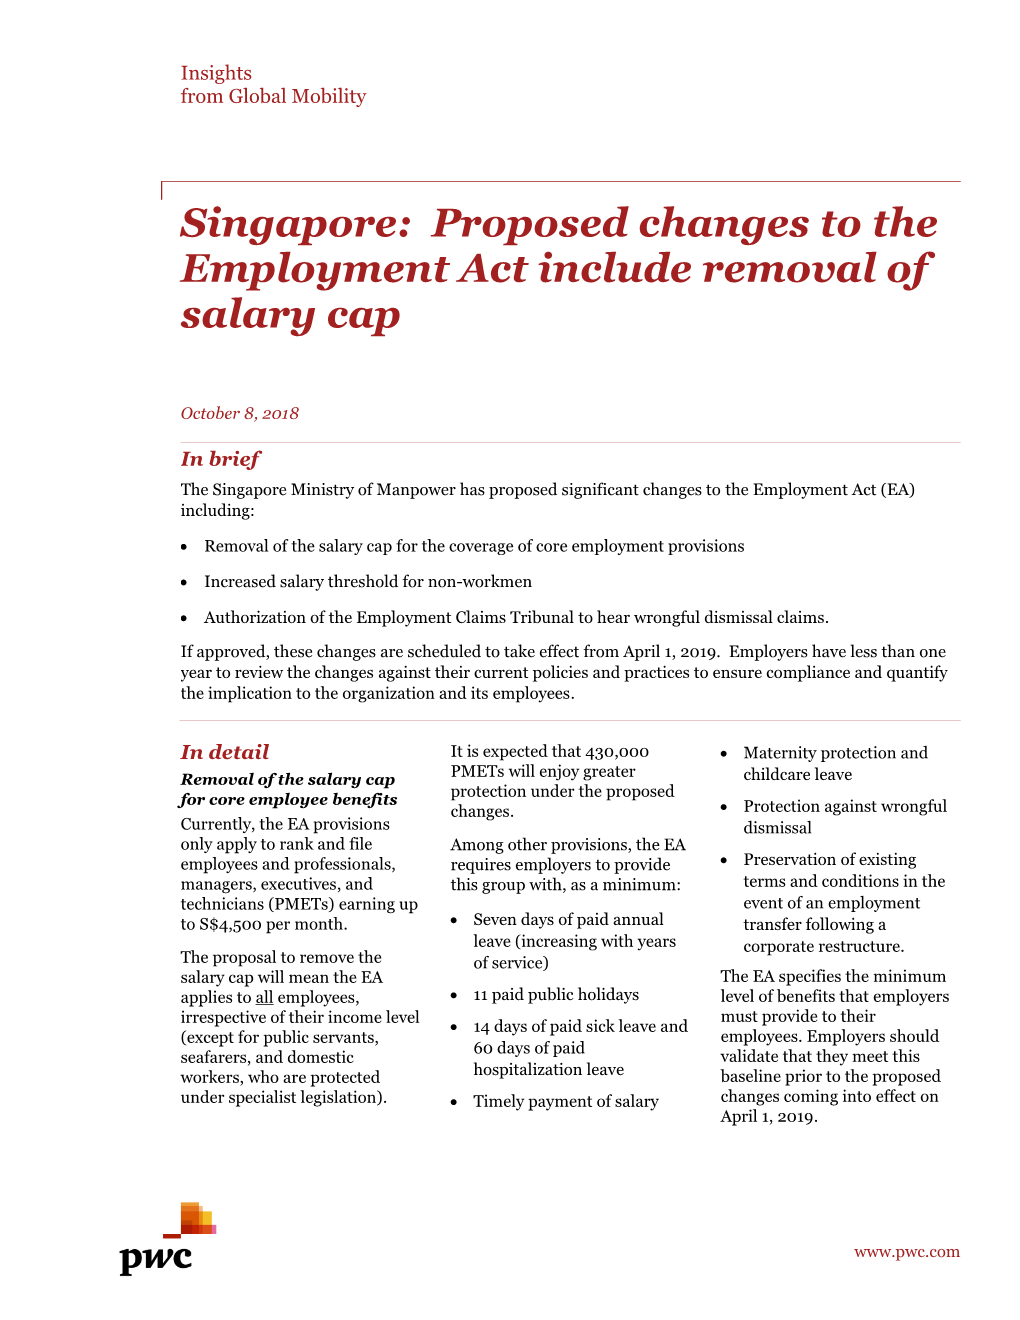 Proposed Changes to the Employment Act Include Removal of Salary Cap